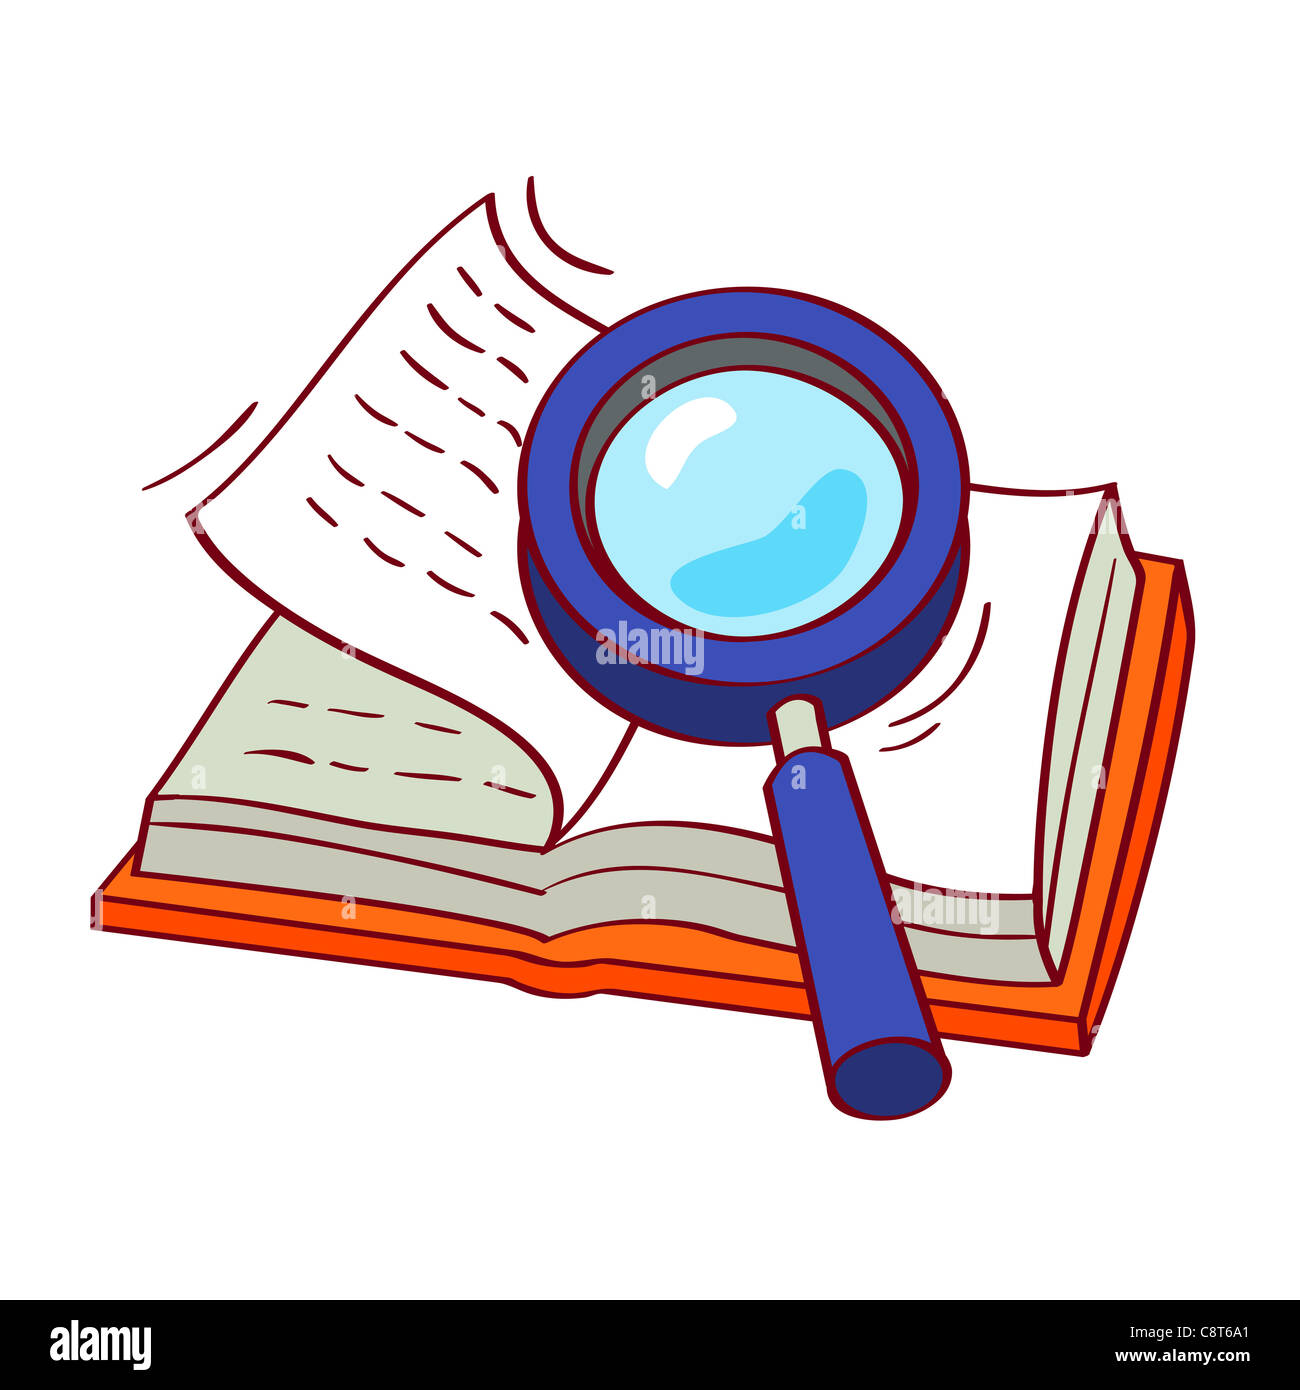 Illustration of magnifying glass with a book Stock Photo